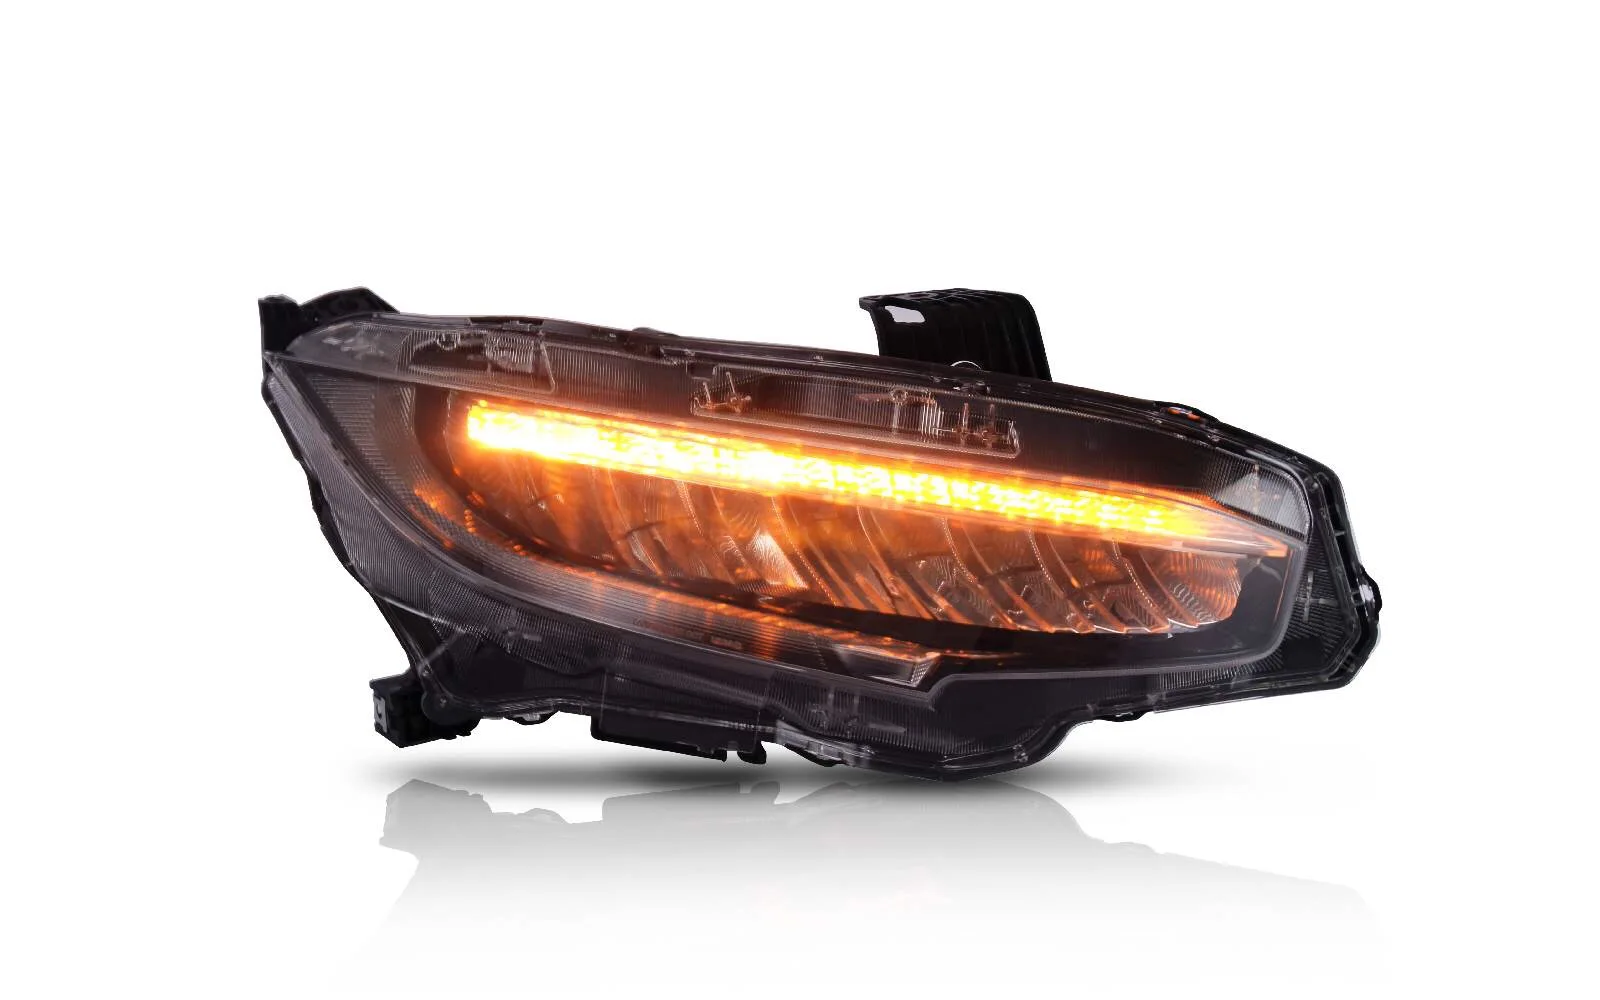 VLAND manufacturer for car headlight for Civic head light 2016 2017 2018 LED head lamp with moving signal & color-changing DRL